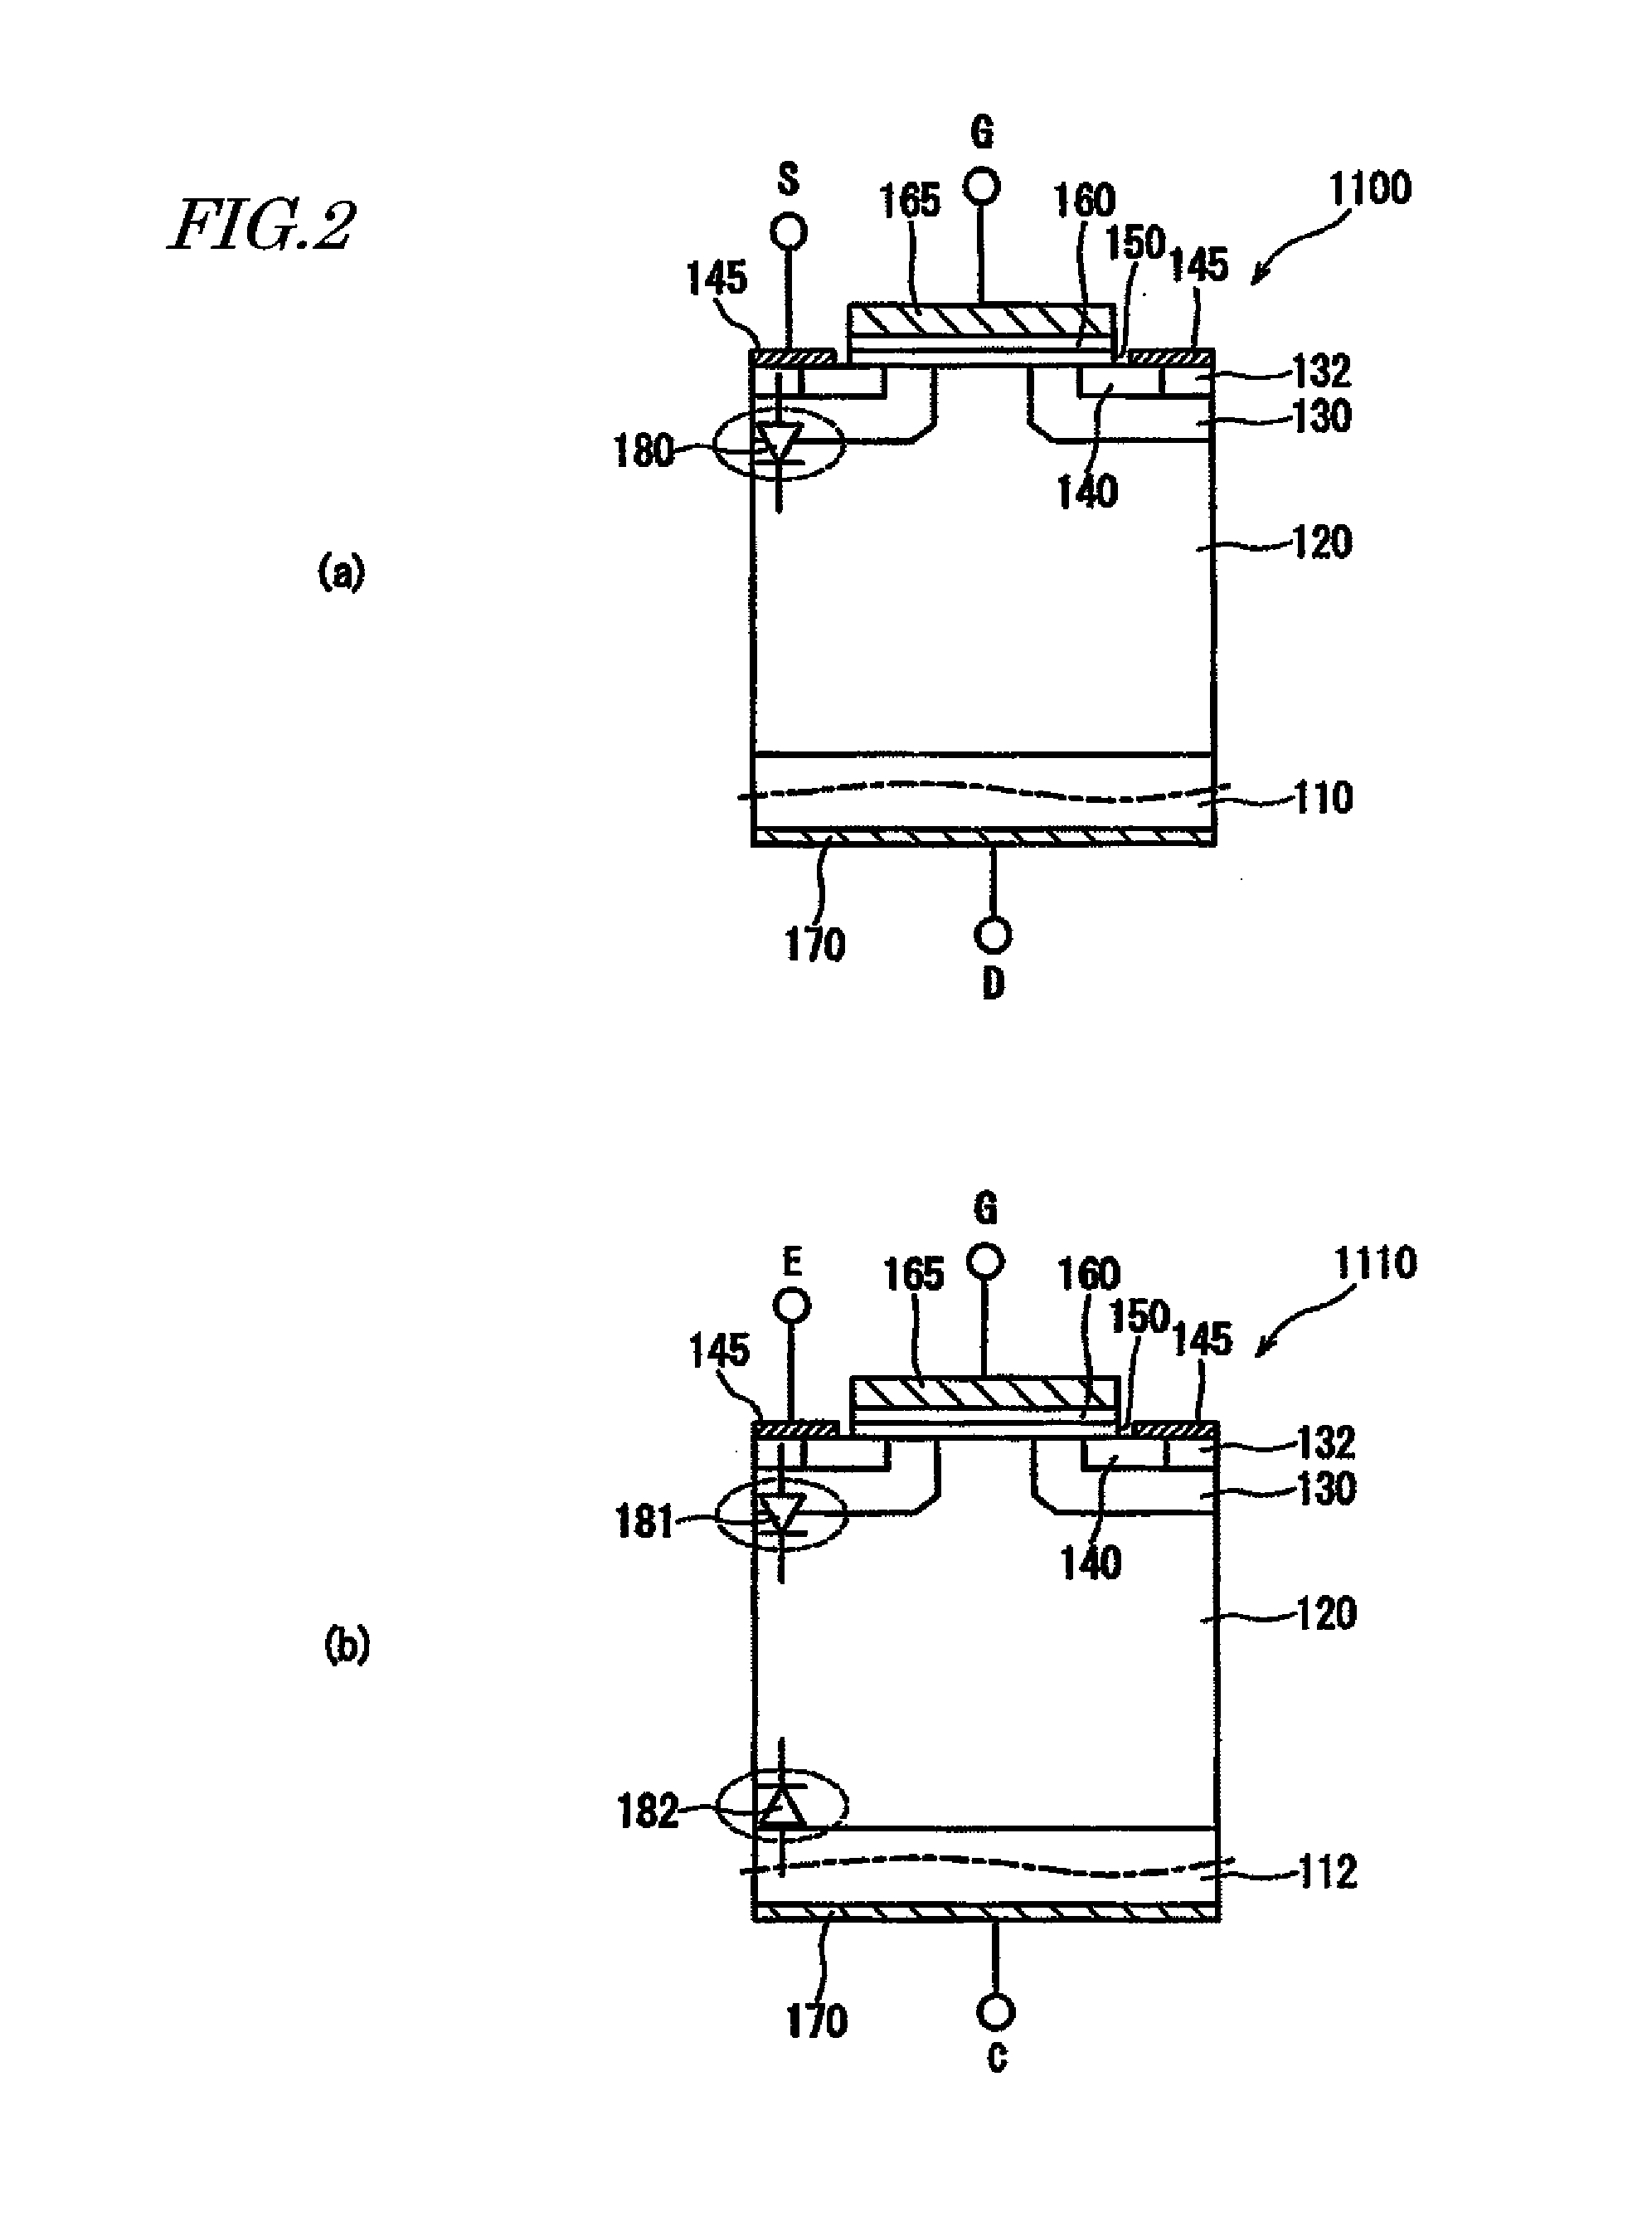 Semiconductor element, semiconductor device, and power converter